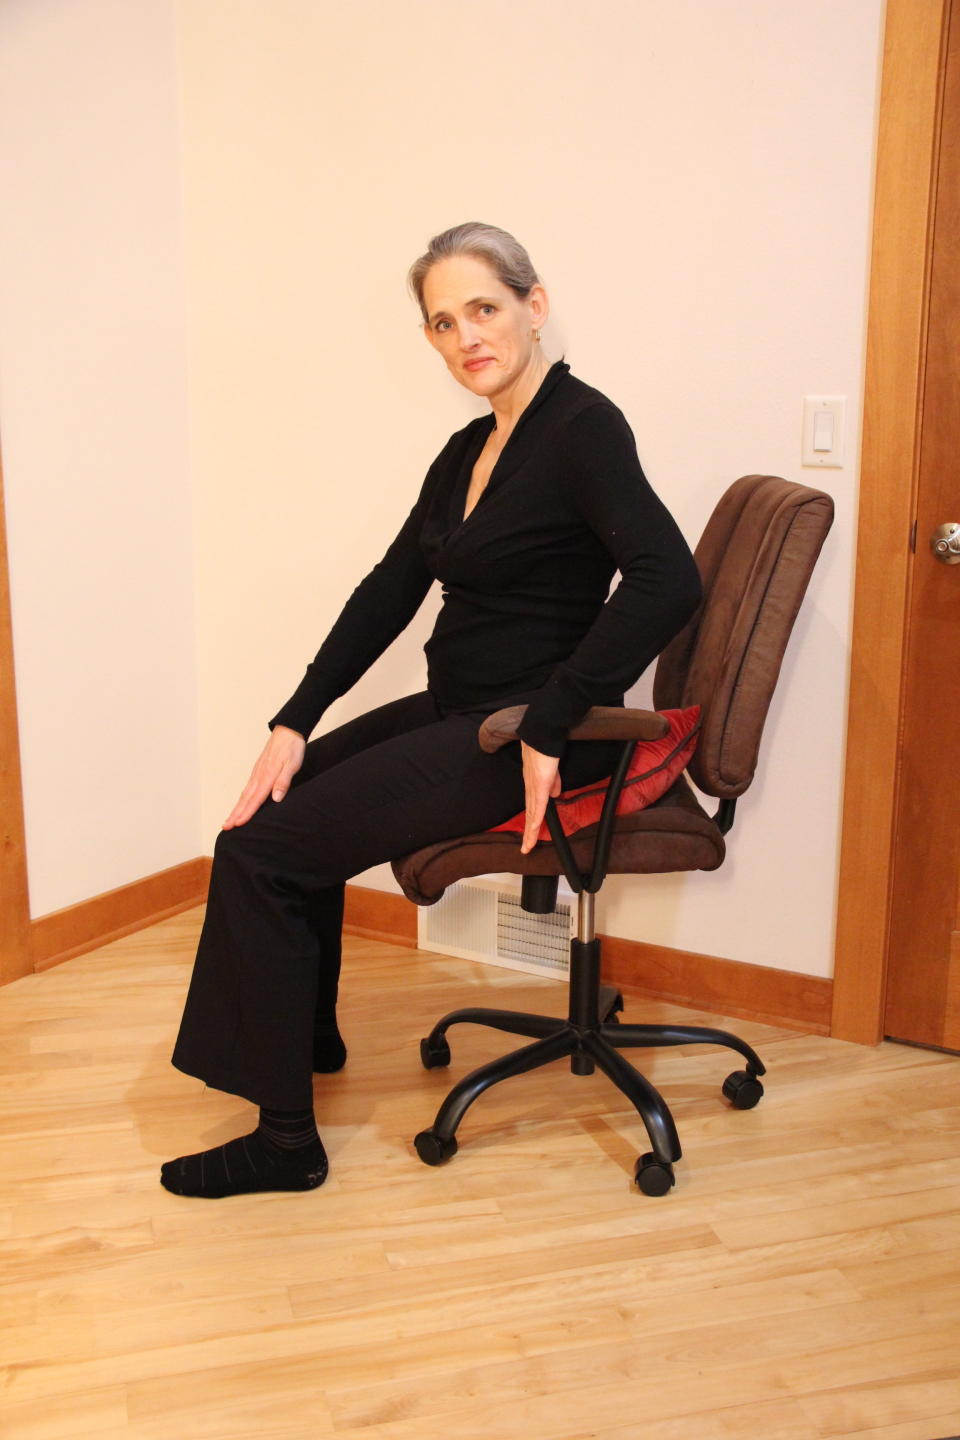 Sitting forward with a pillow on the diagonal can give sit bones support while allowing the thigh bones to slope down, Bryan advised. (Photo: The Body at Work Ergonomics/Sara Kraft)